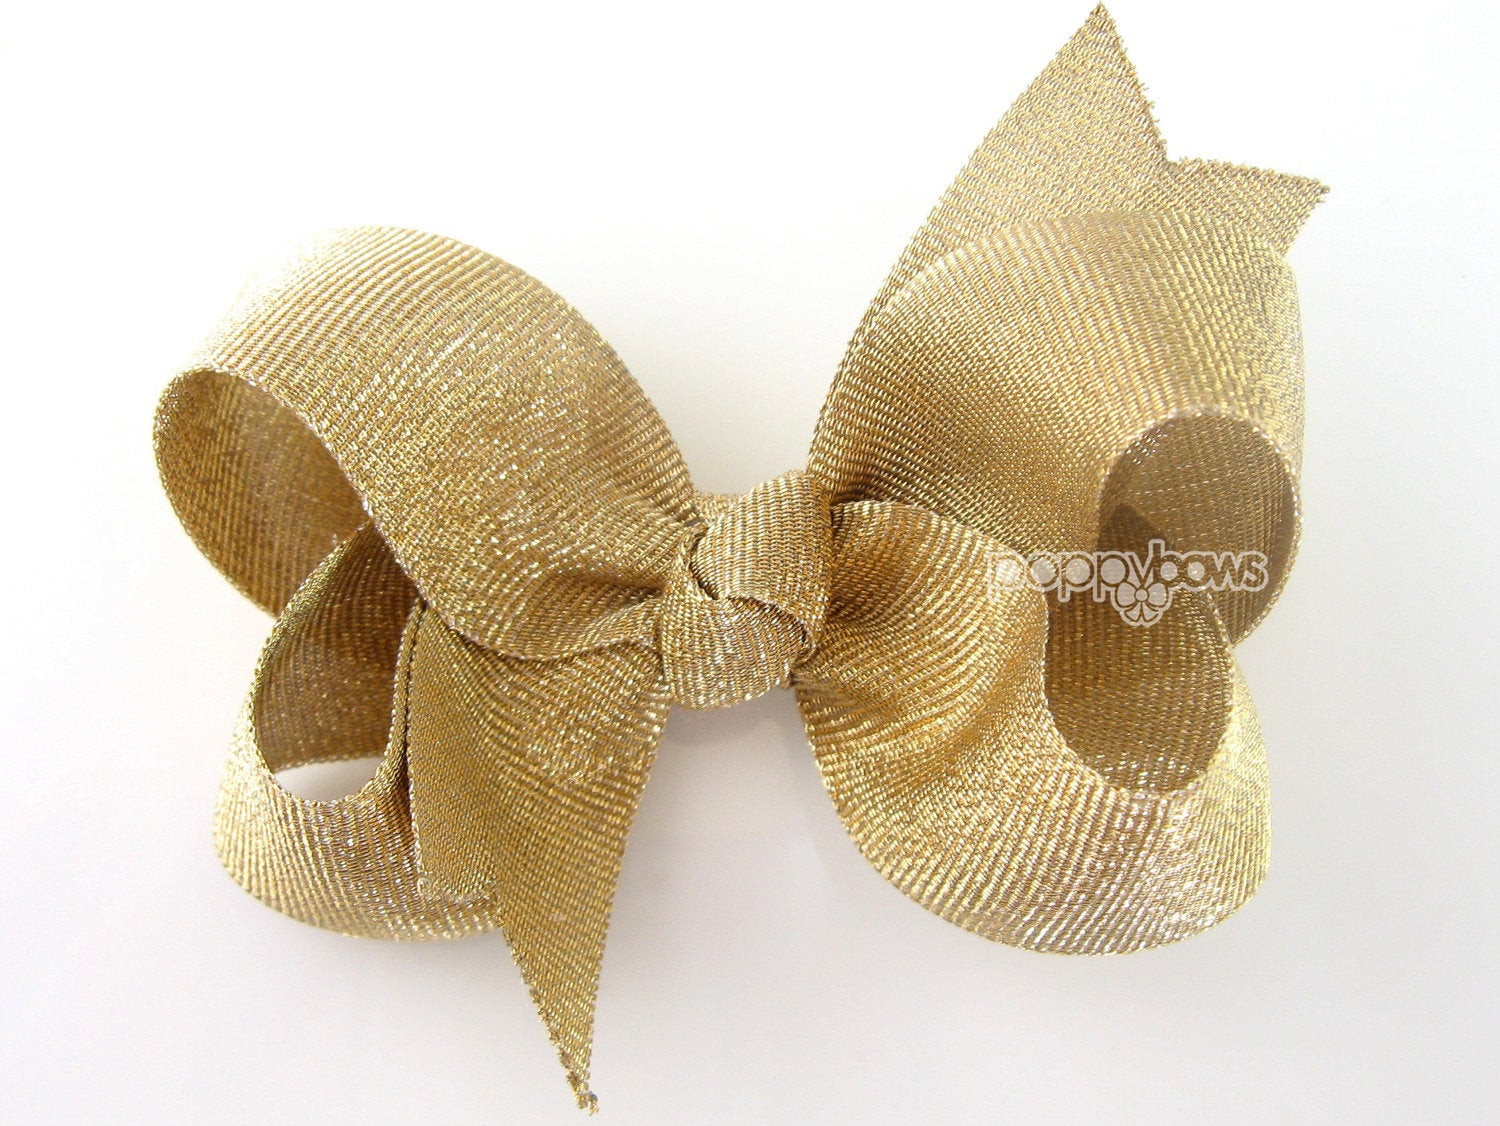 Gold Hair Bow For Baby
 Gold Hair Bow Gold Baby Hairbow 3 4 or 5 Inch Bow by PoppyBows